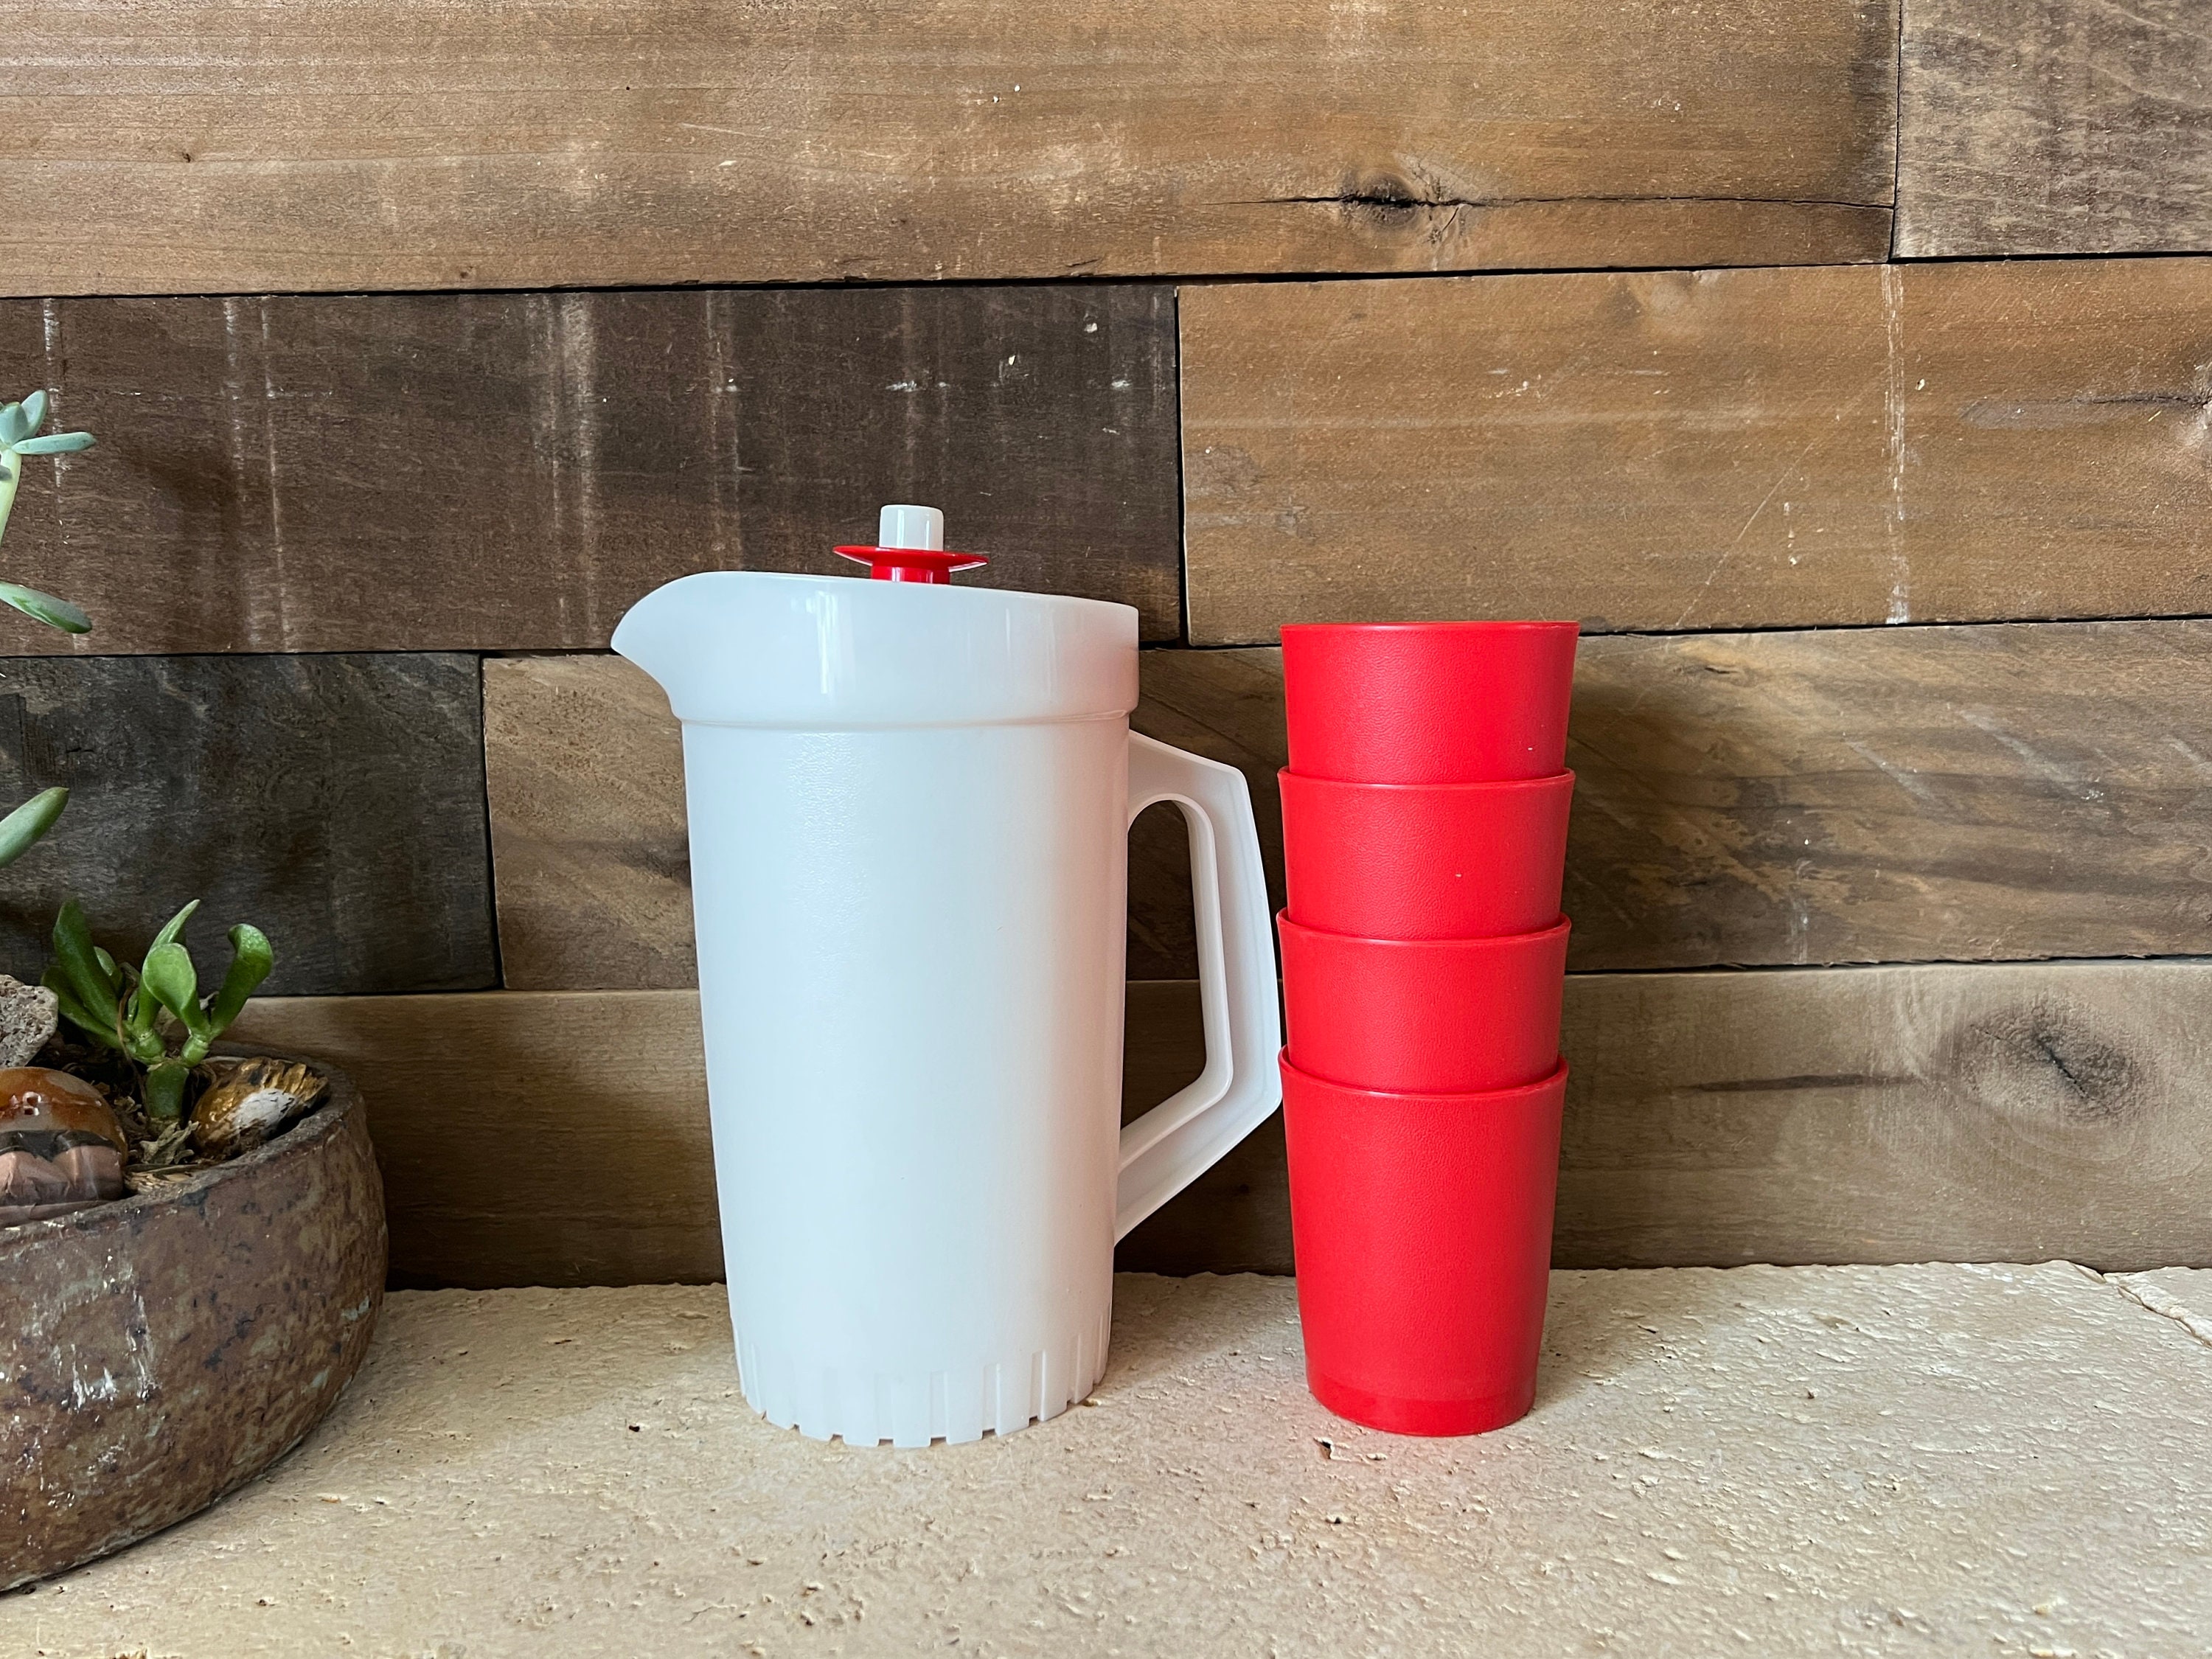 Early 70's Tupperware 2,2 Liters Orange Pitcher With White Push Button  Vacuum Lid 